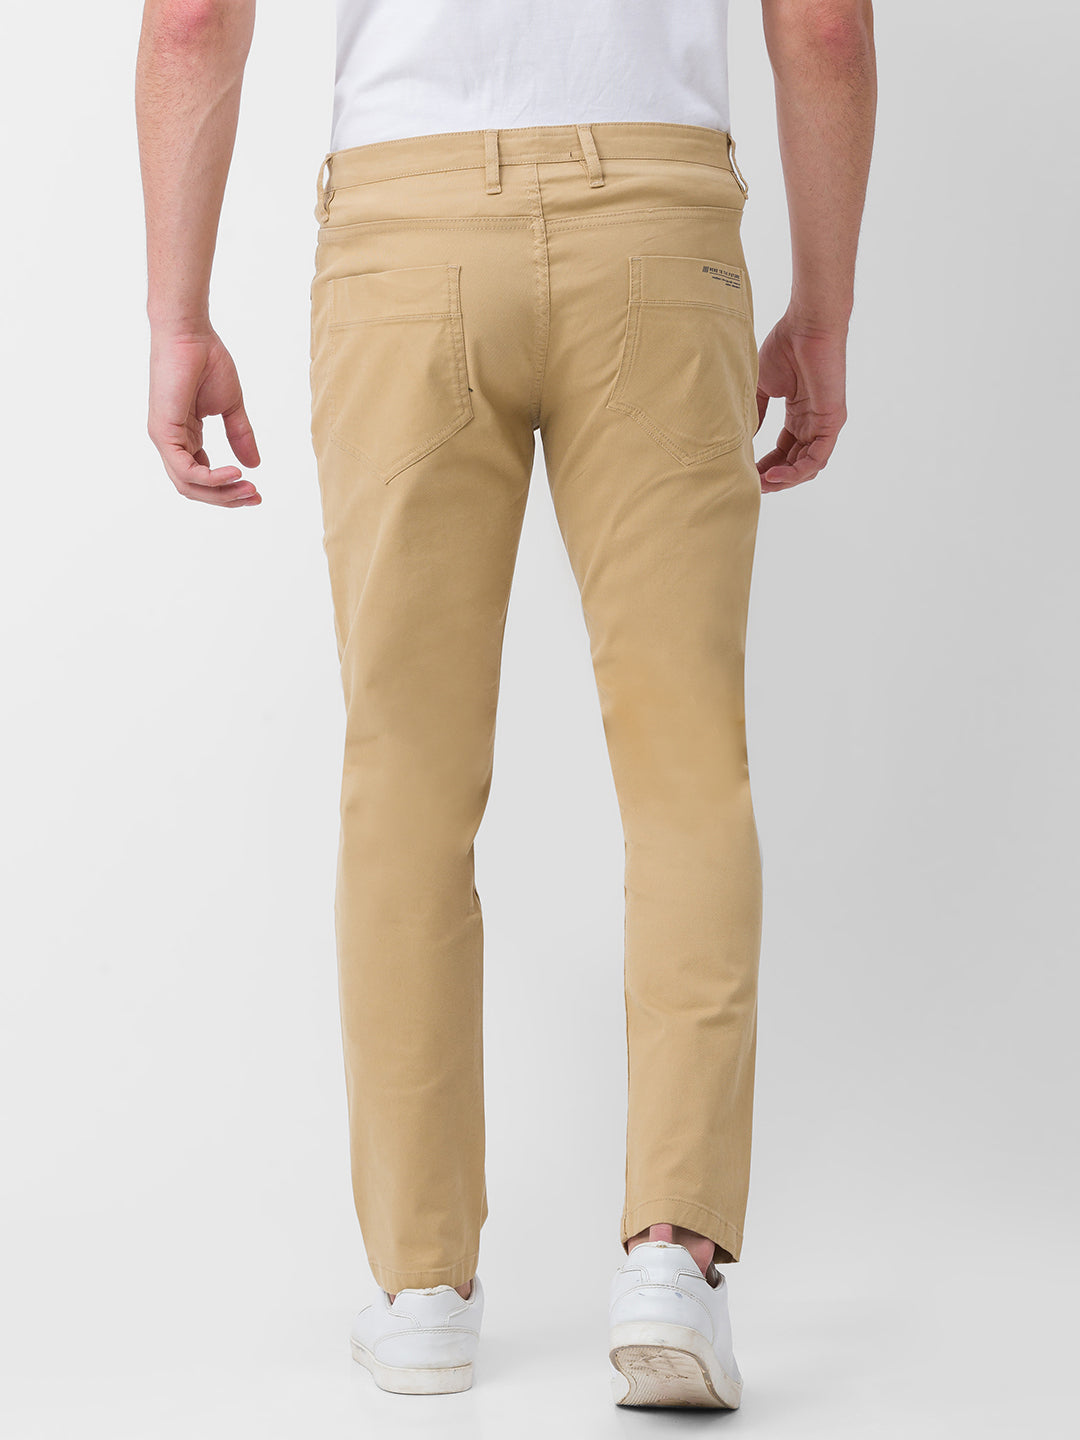 Search Results for: cargo pant